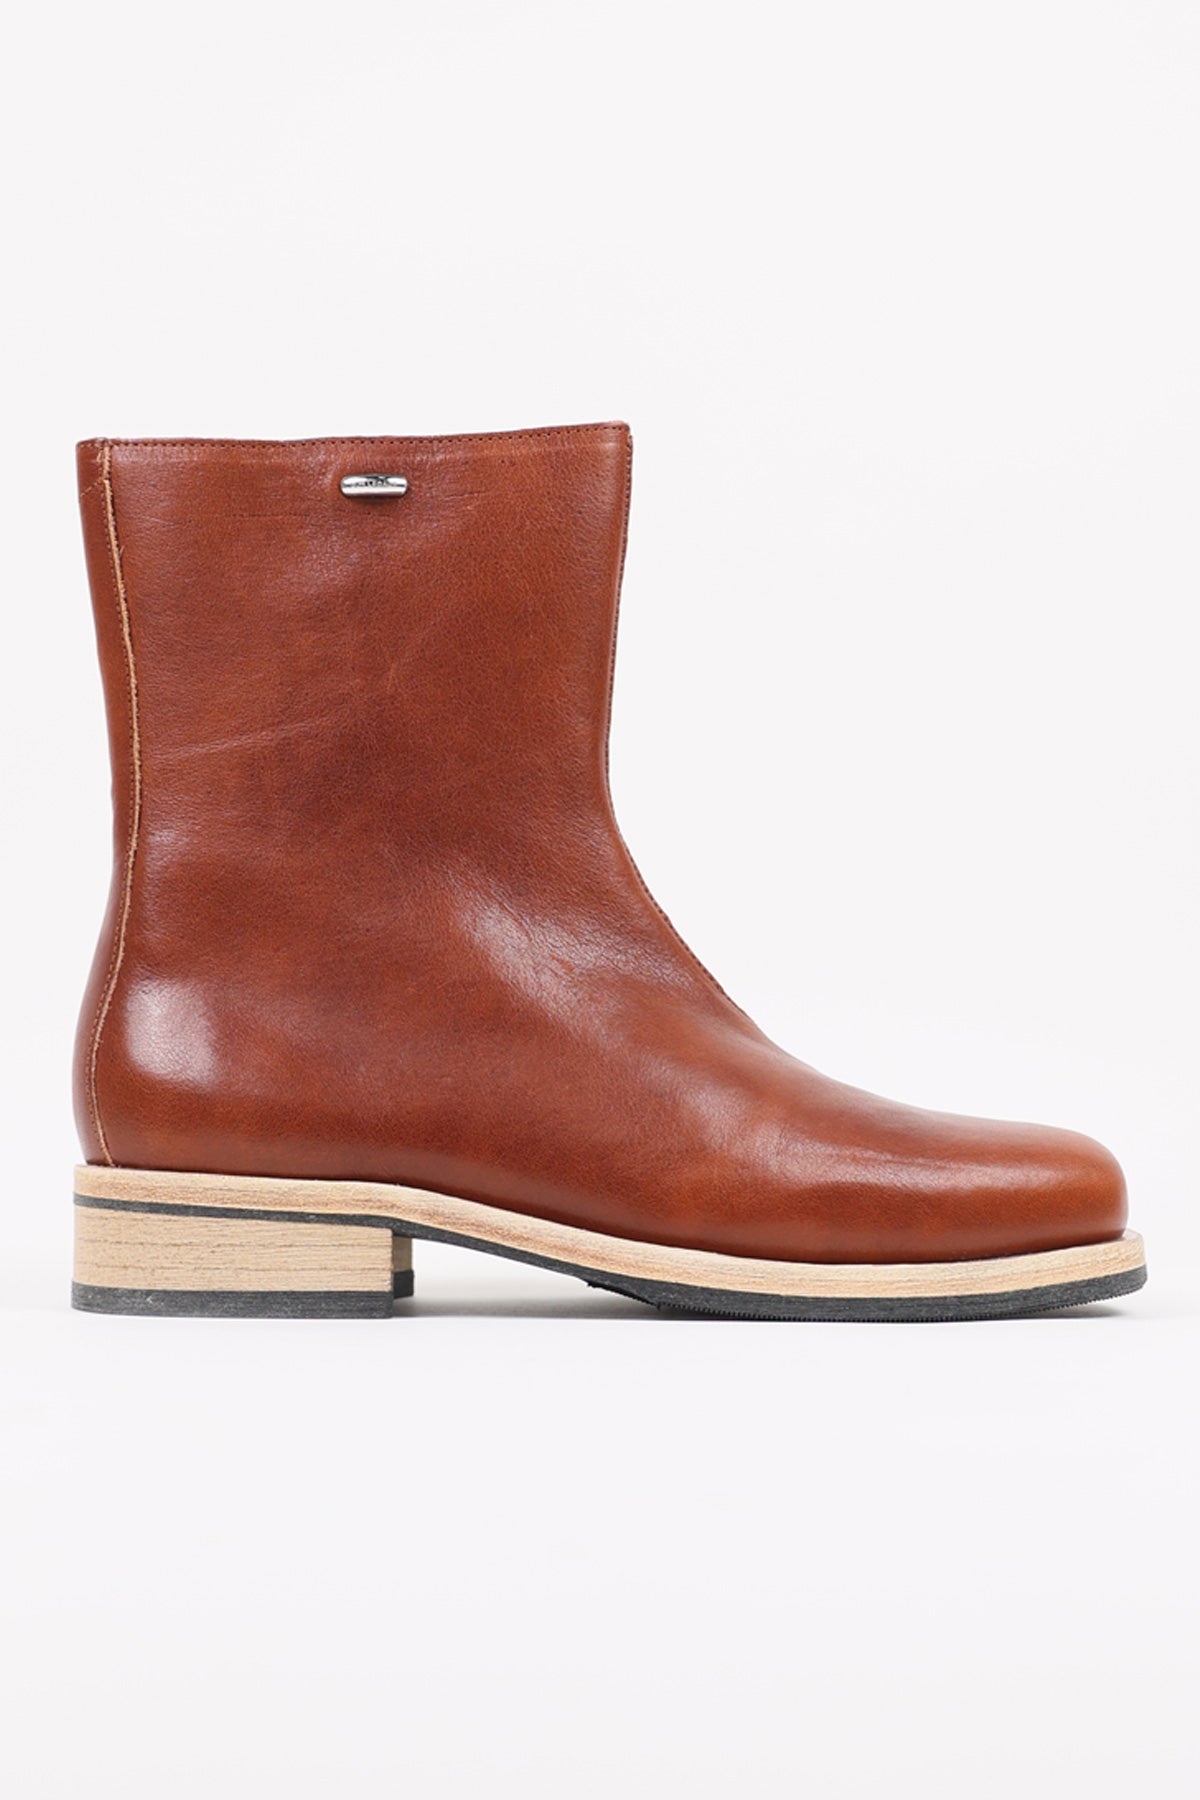 Camion Boot - Coney Cognac Leather - 1